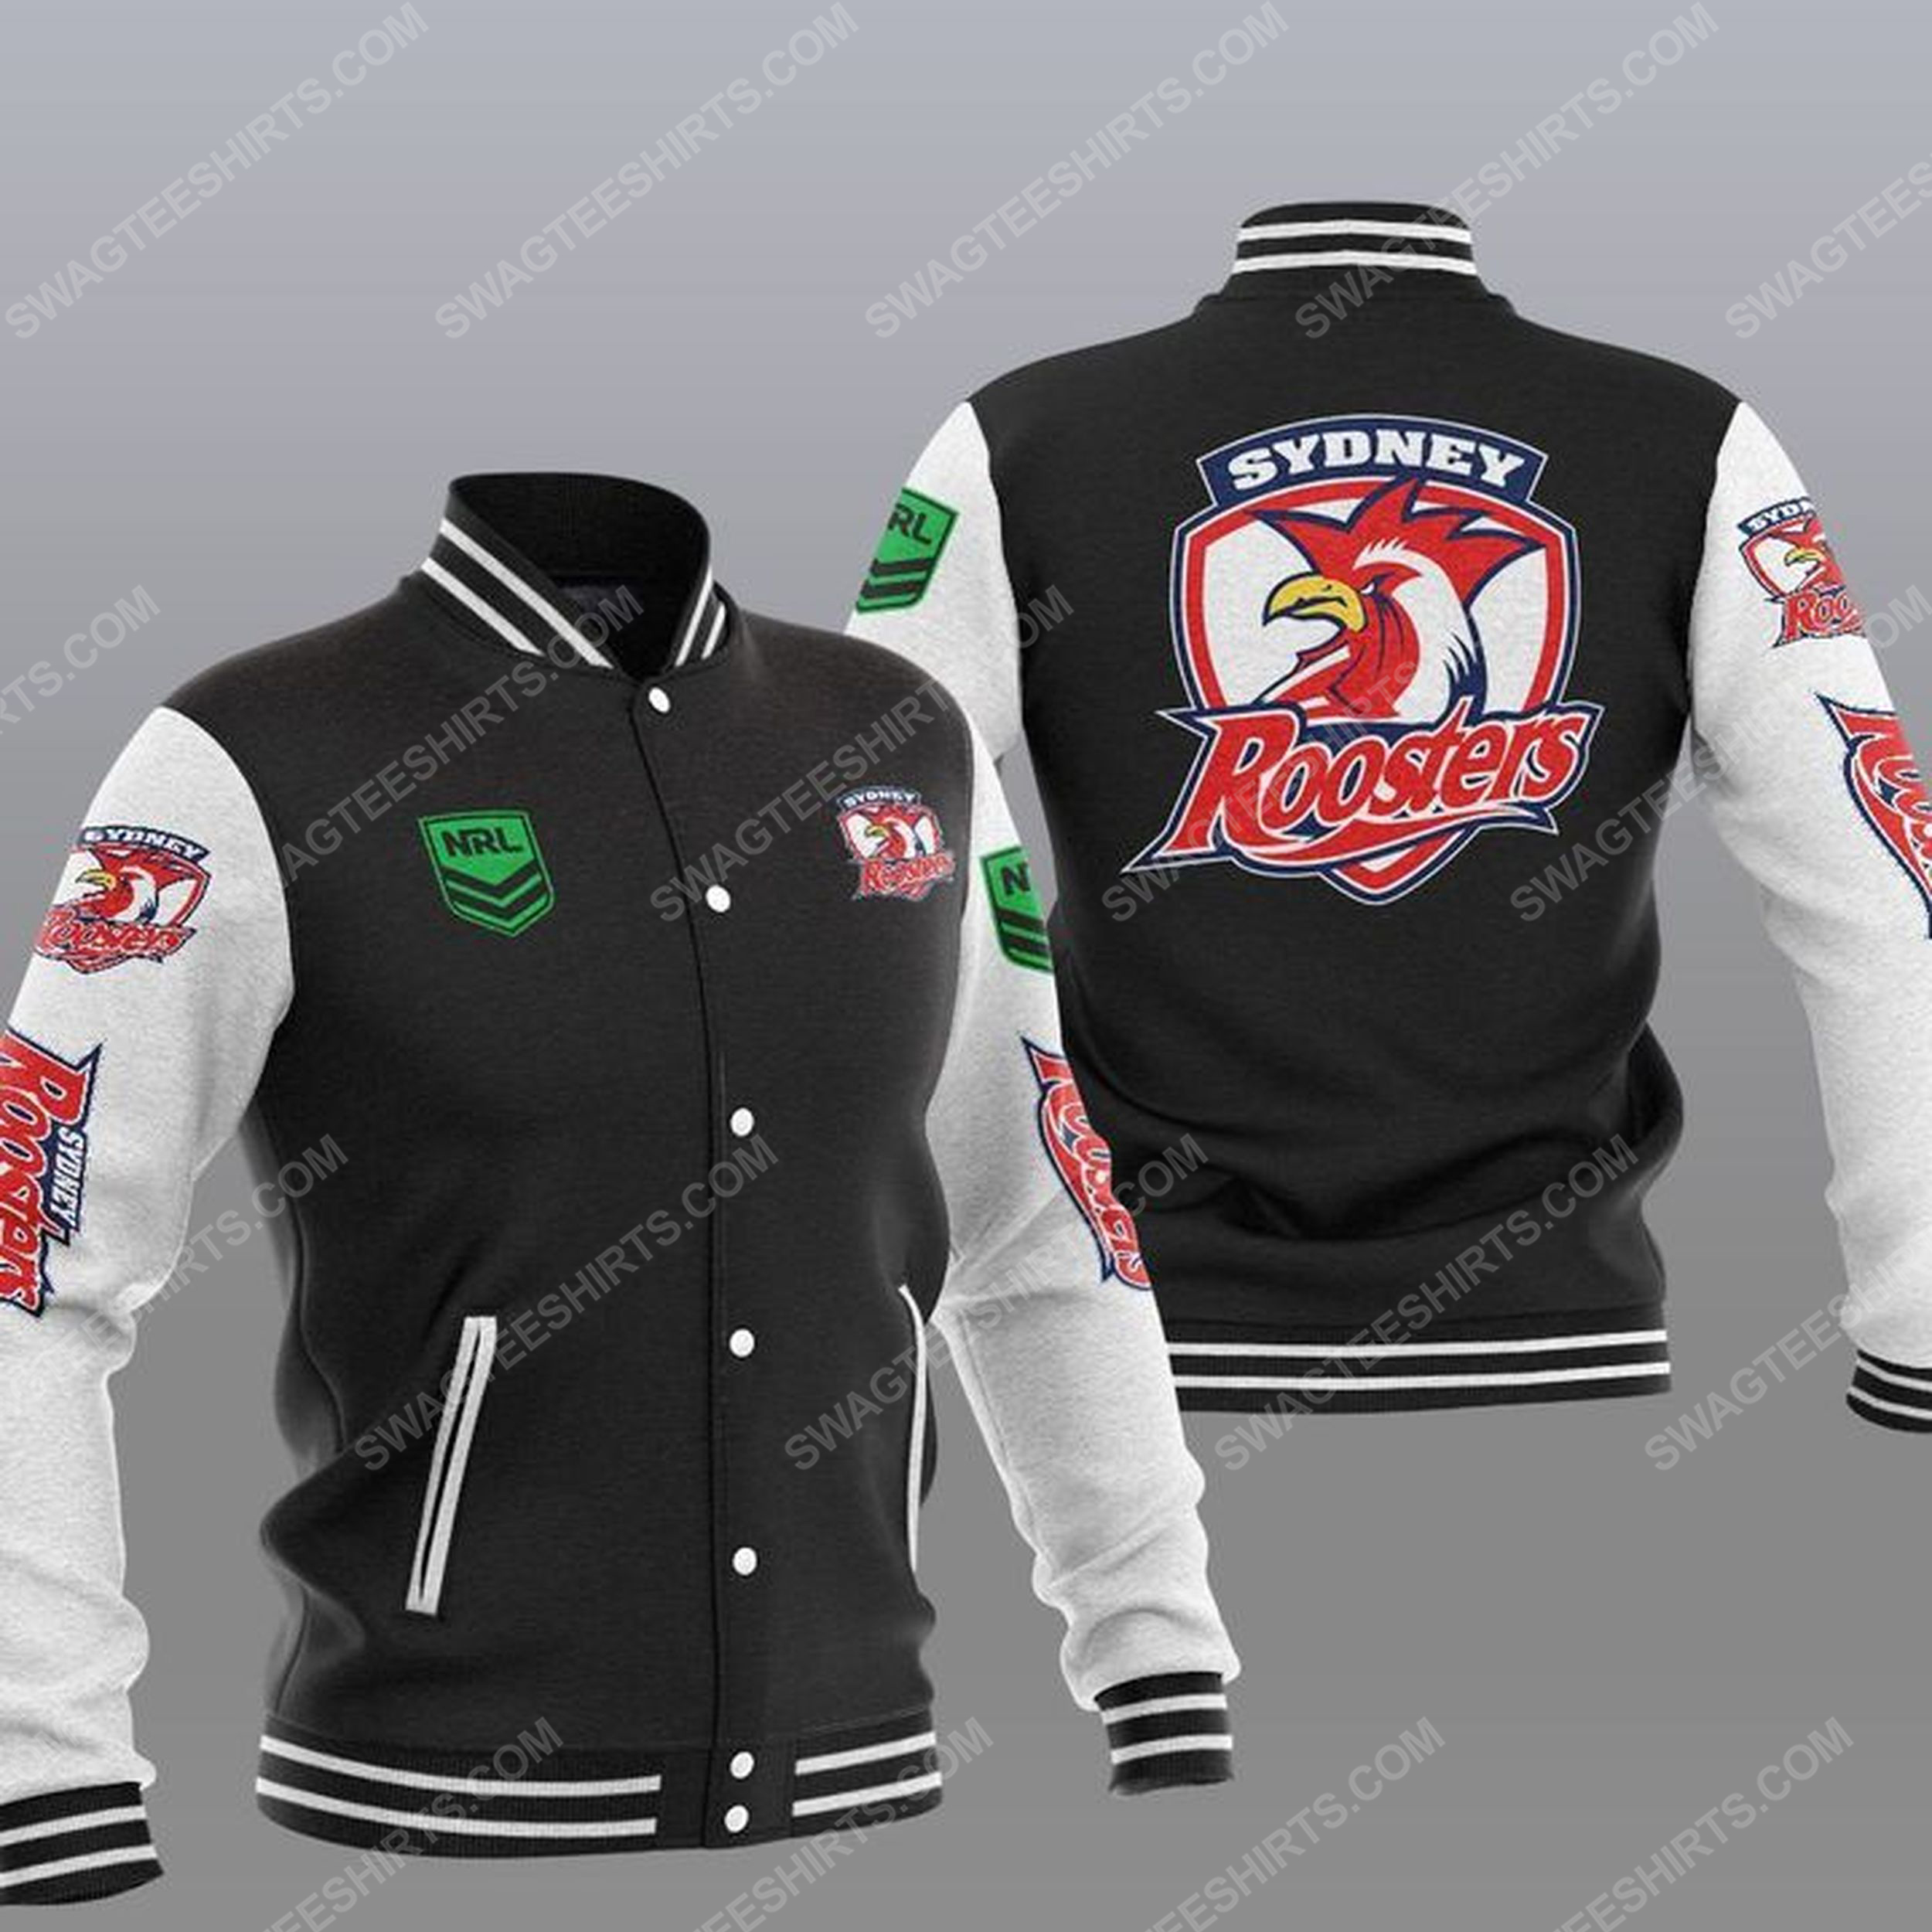 The sydney roosters nfl all over print baseball jacket - black 1